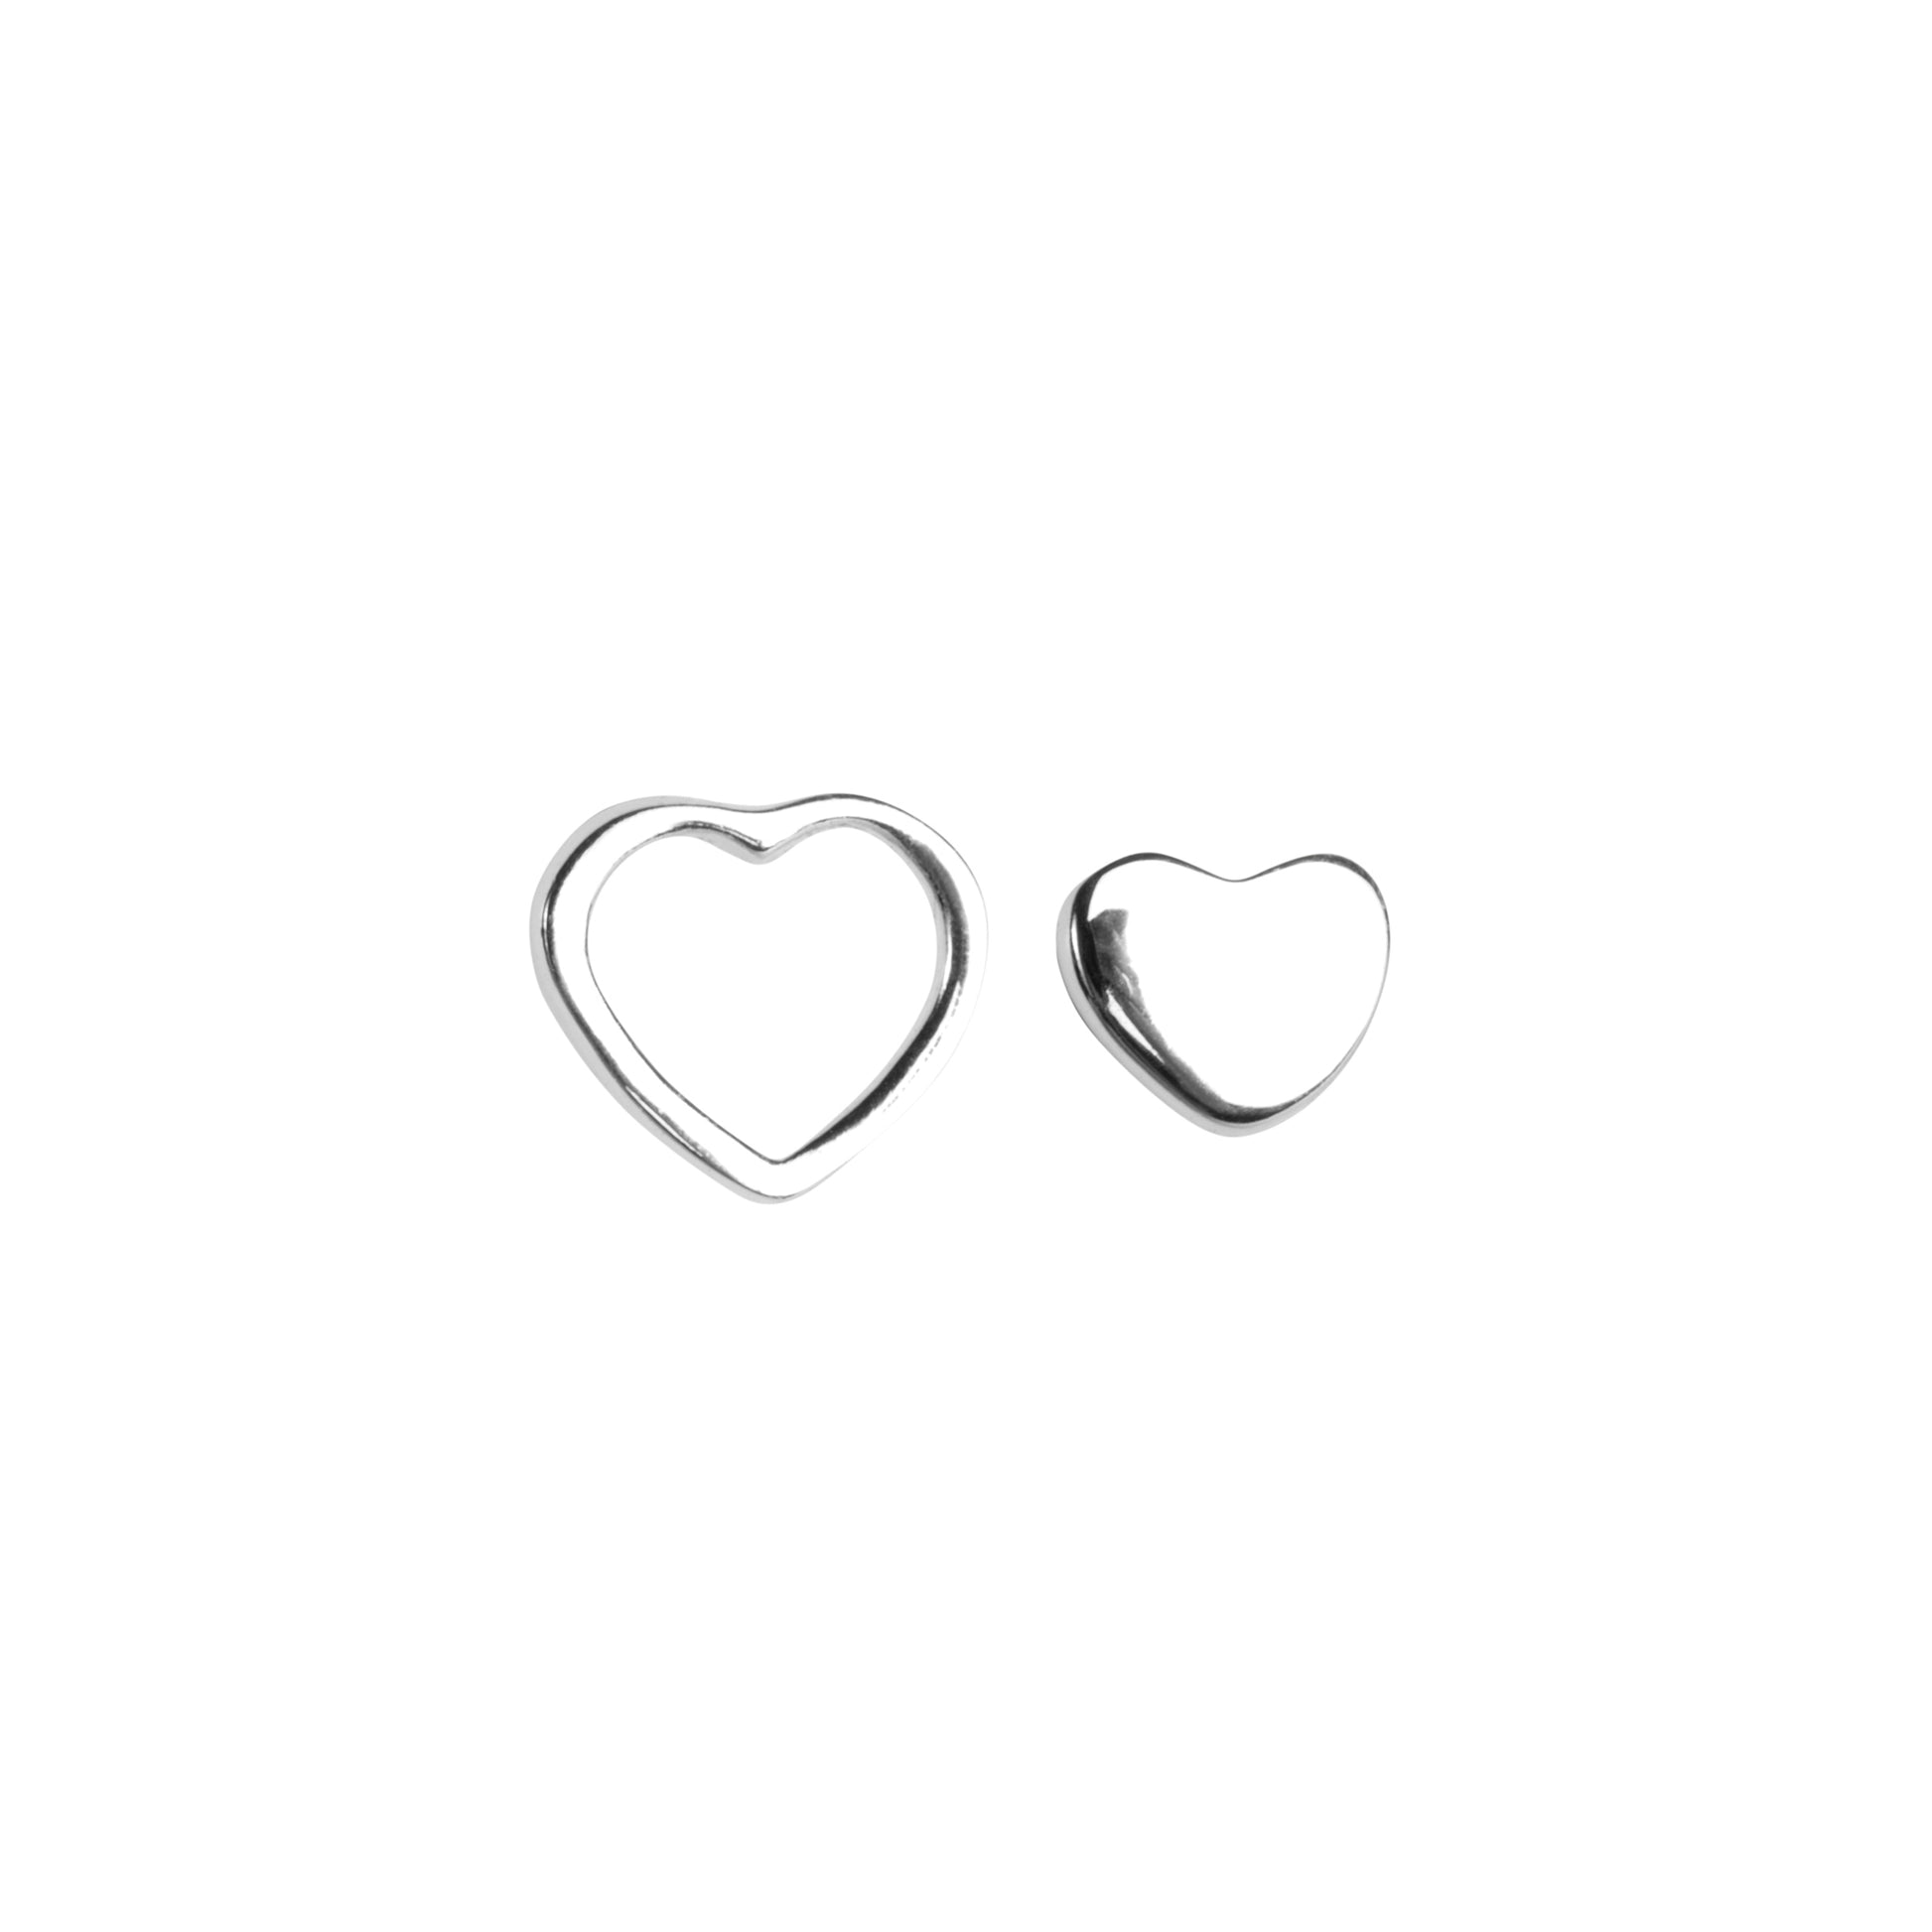 A pair of Family Love Earring Pair - Silver by Lulu Copenhagen, small heart-shaped earrings on a white background.